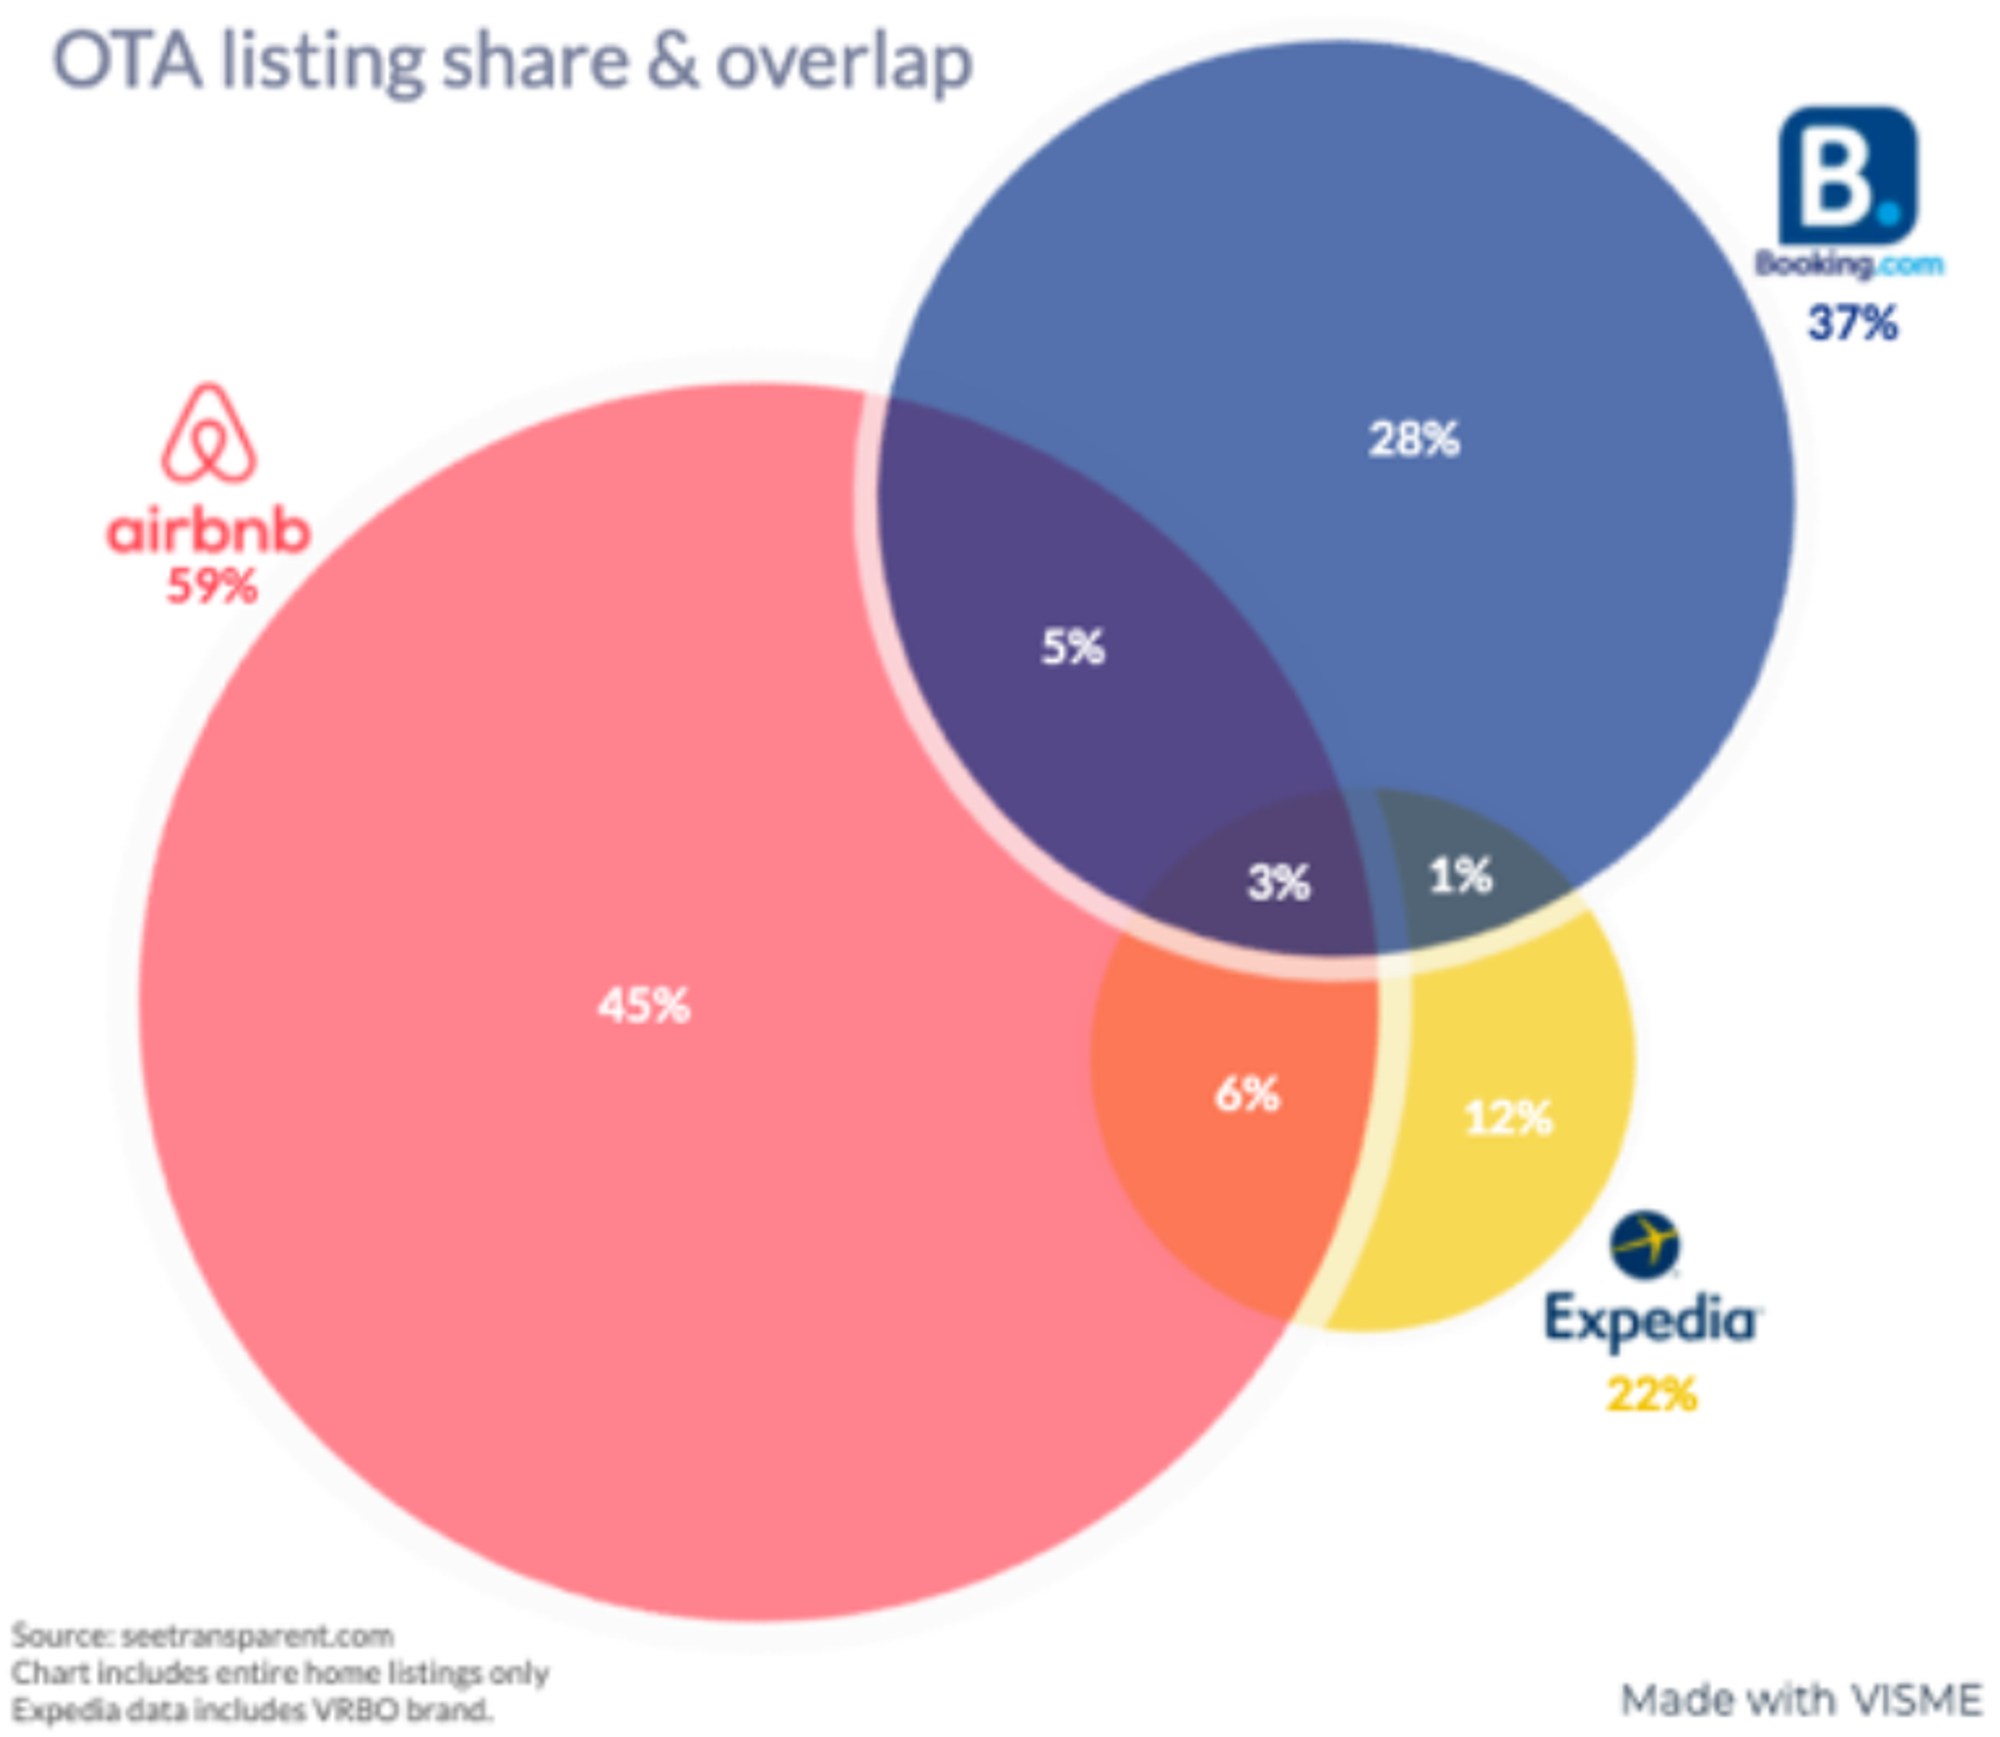 Looking at booking data, the exclusivity argument loses some value. According to data from Transparent, 67% of bookings in the vacation rental category go to listings for which Airbnb has no exclusivity.